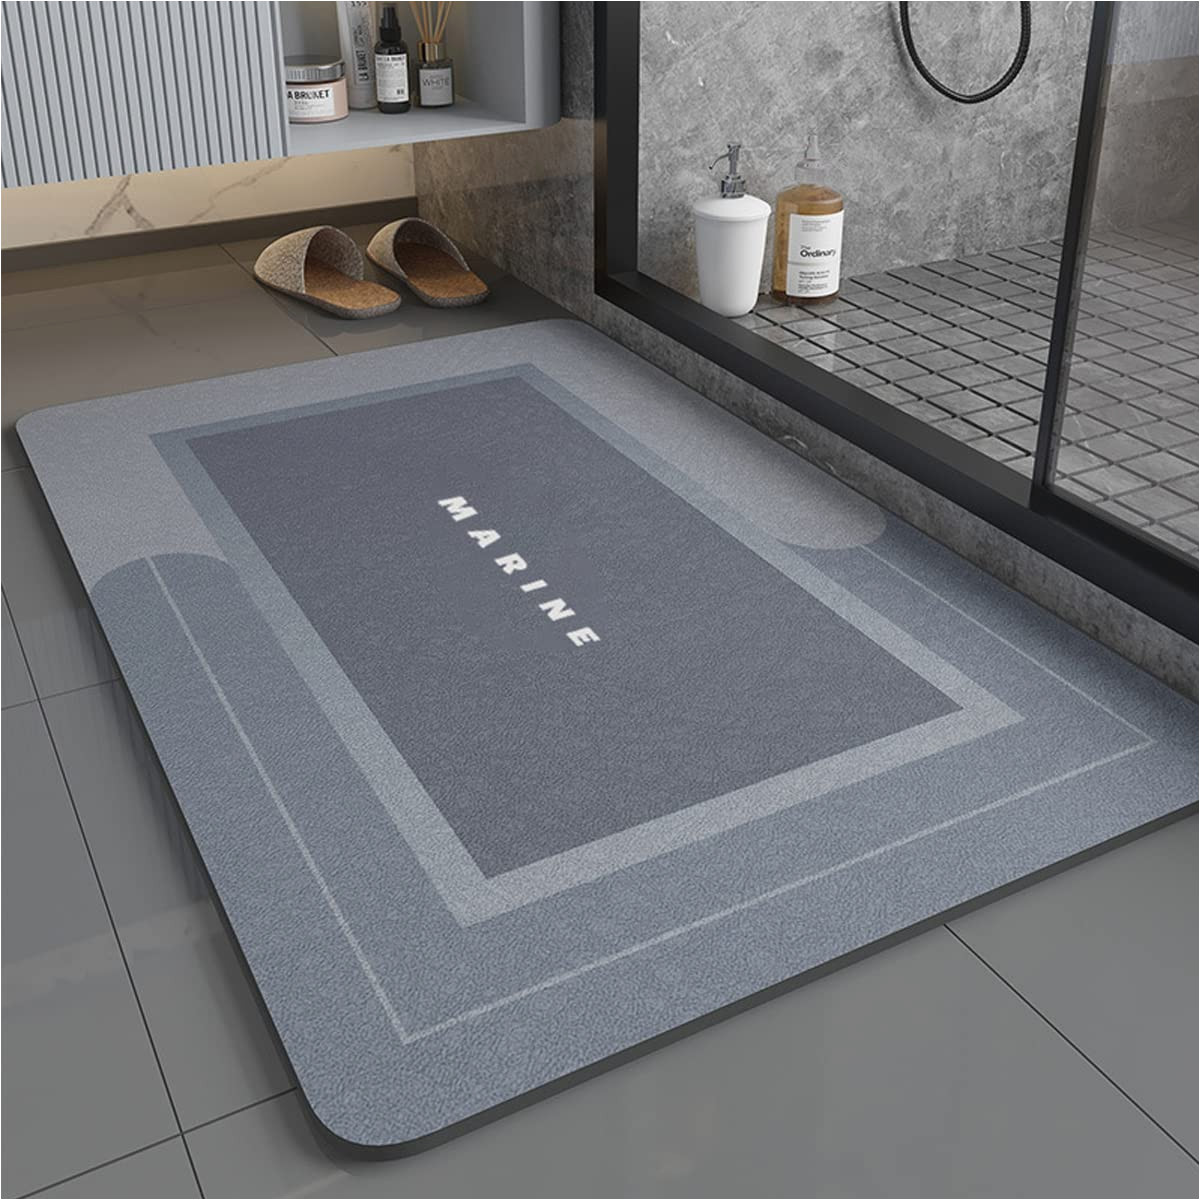 Super Absorbent Bath Rug Mdxmy Super Absorbent Floor Mat Quick Dry Shower Rugs and Mats Non-slip Easy to Clean Bath Mat (square Blue, 16″x24″)